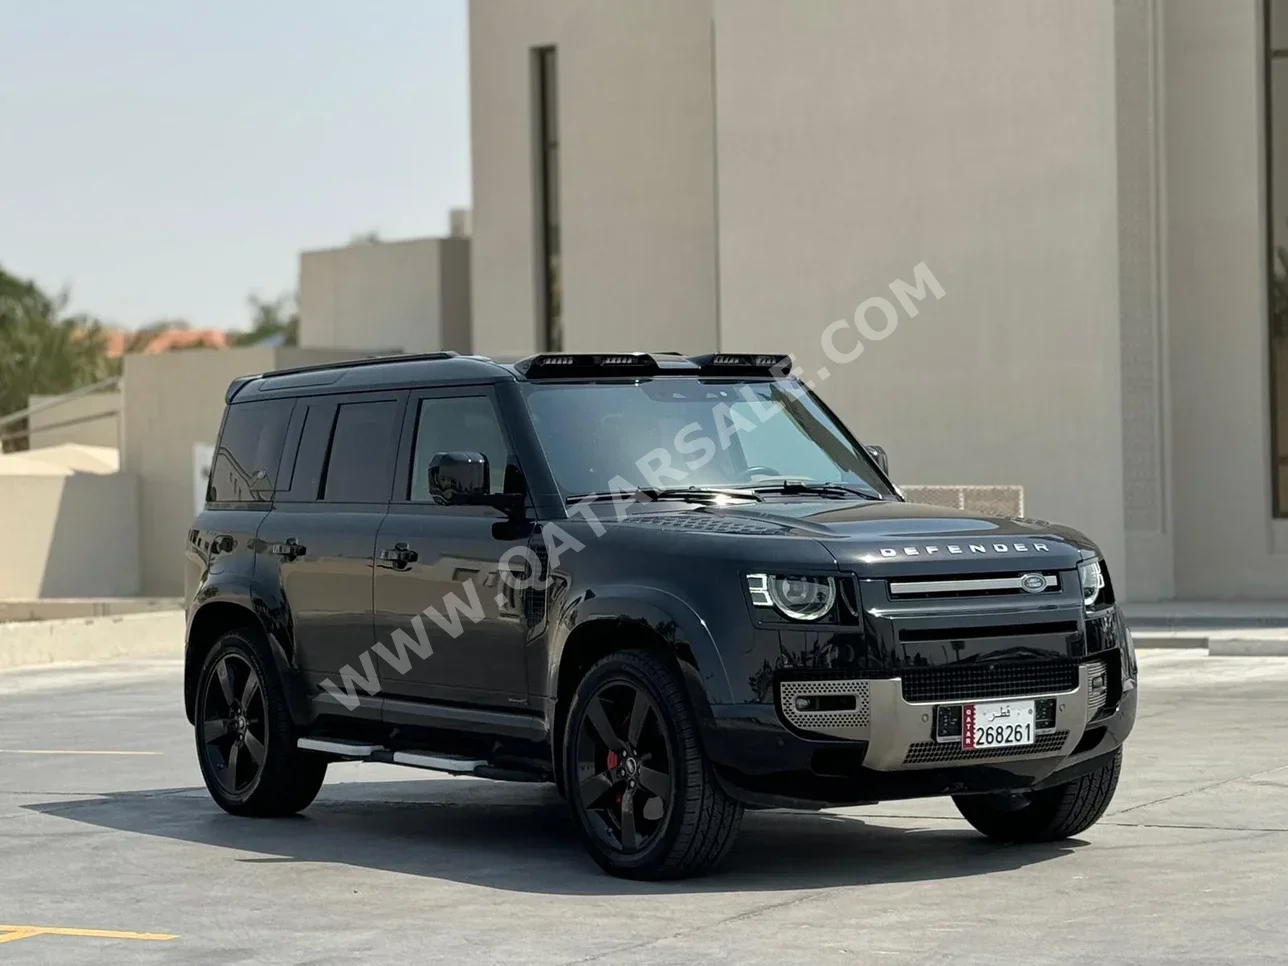 Land Rover  Defender  110 X  2021  Automatic  59,000 Km  6 Cylinder  Four Wheel Drive (4WD)  SUV  Black  With Warranty